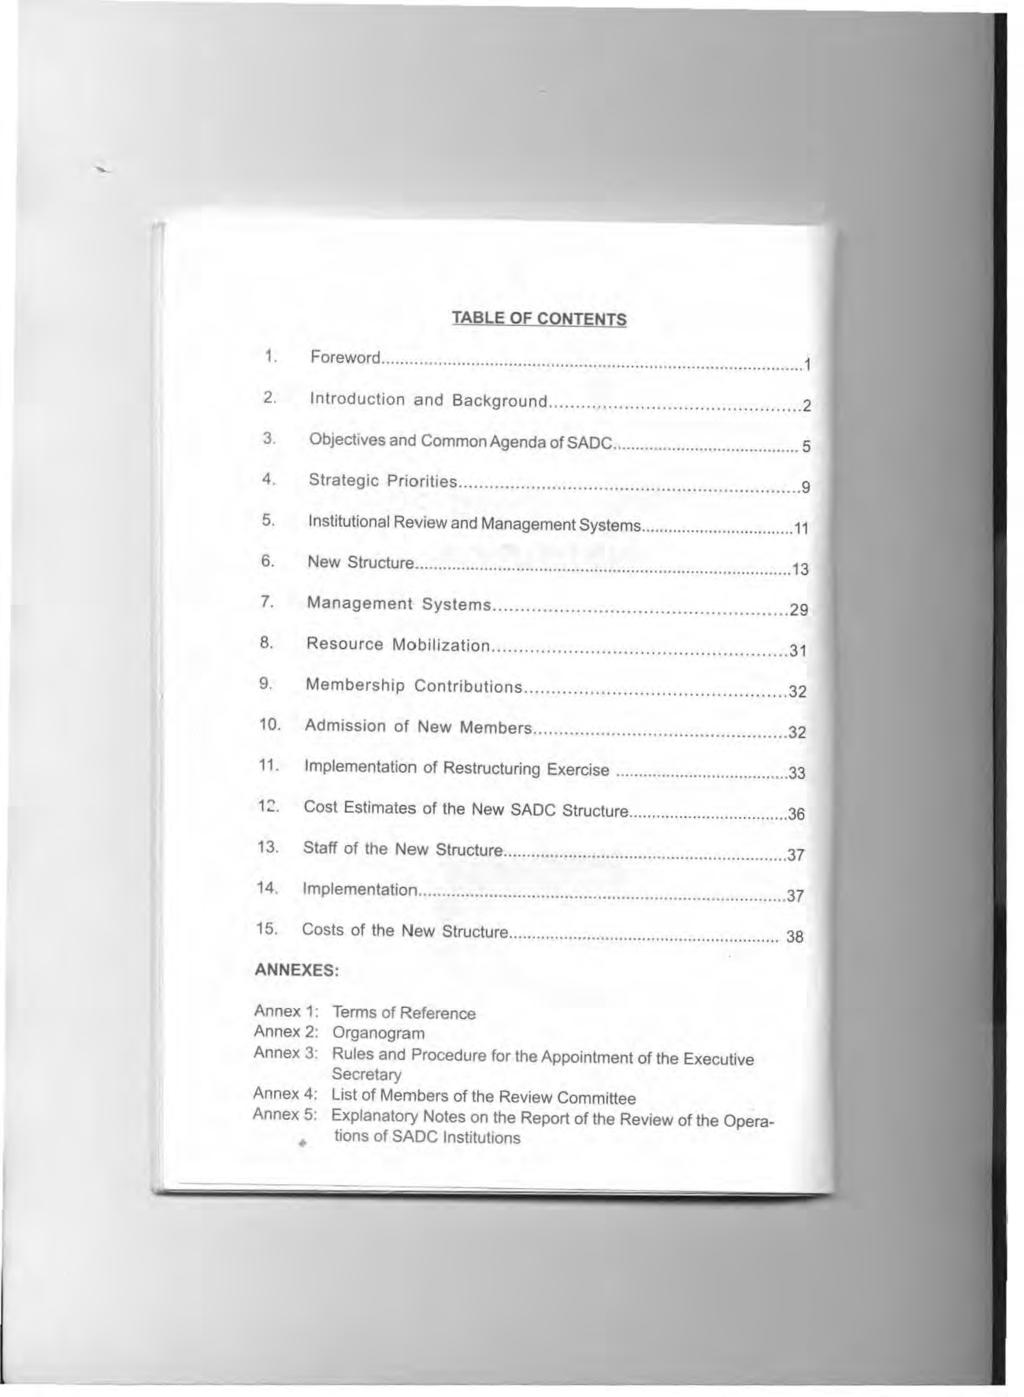 TABLE OF CONTENTS 1. Foreword... 1 2. Introduction and Background... 2 3. Objectives and Common Agenda of SADC... 5 4. Strategic Priorities... 9 5. Institutional Review and Management Systems... 11 6.